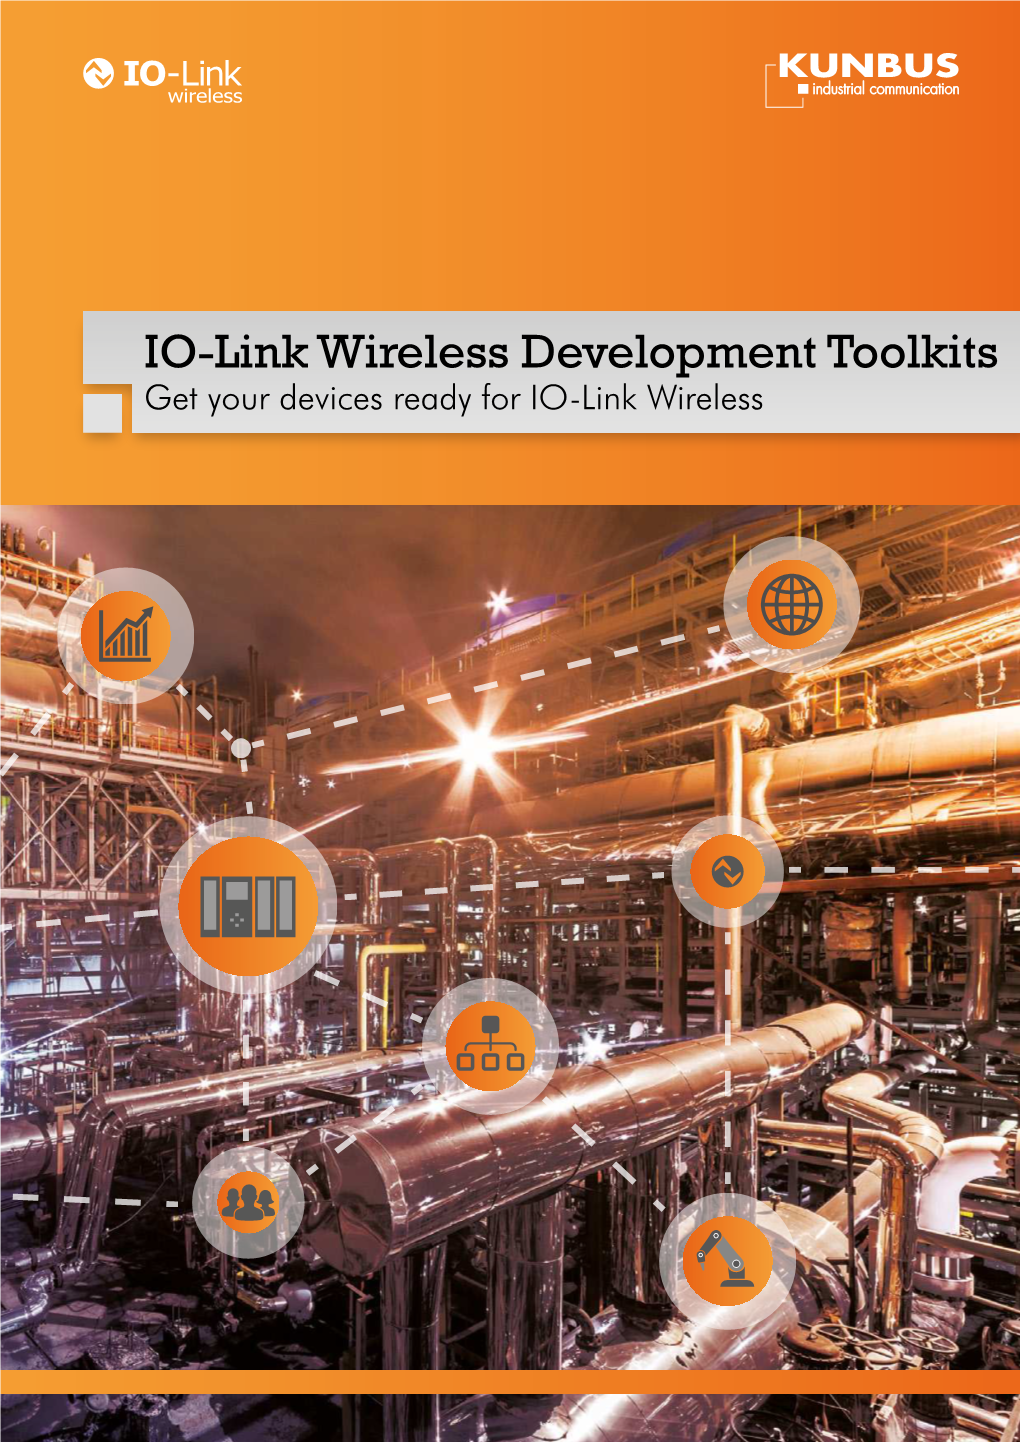 IO-Link Wireless Development Toolkits Get Your Devices Ready for IO-Link Wireless FUTURE-ORIENTED TECHNOLOGY